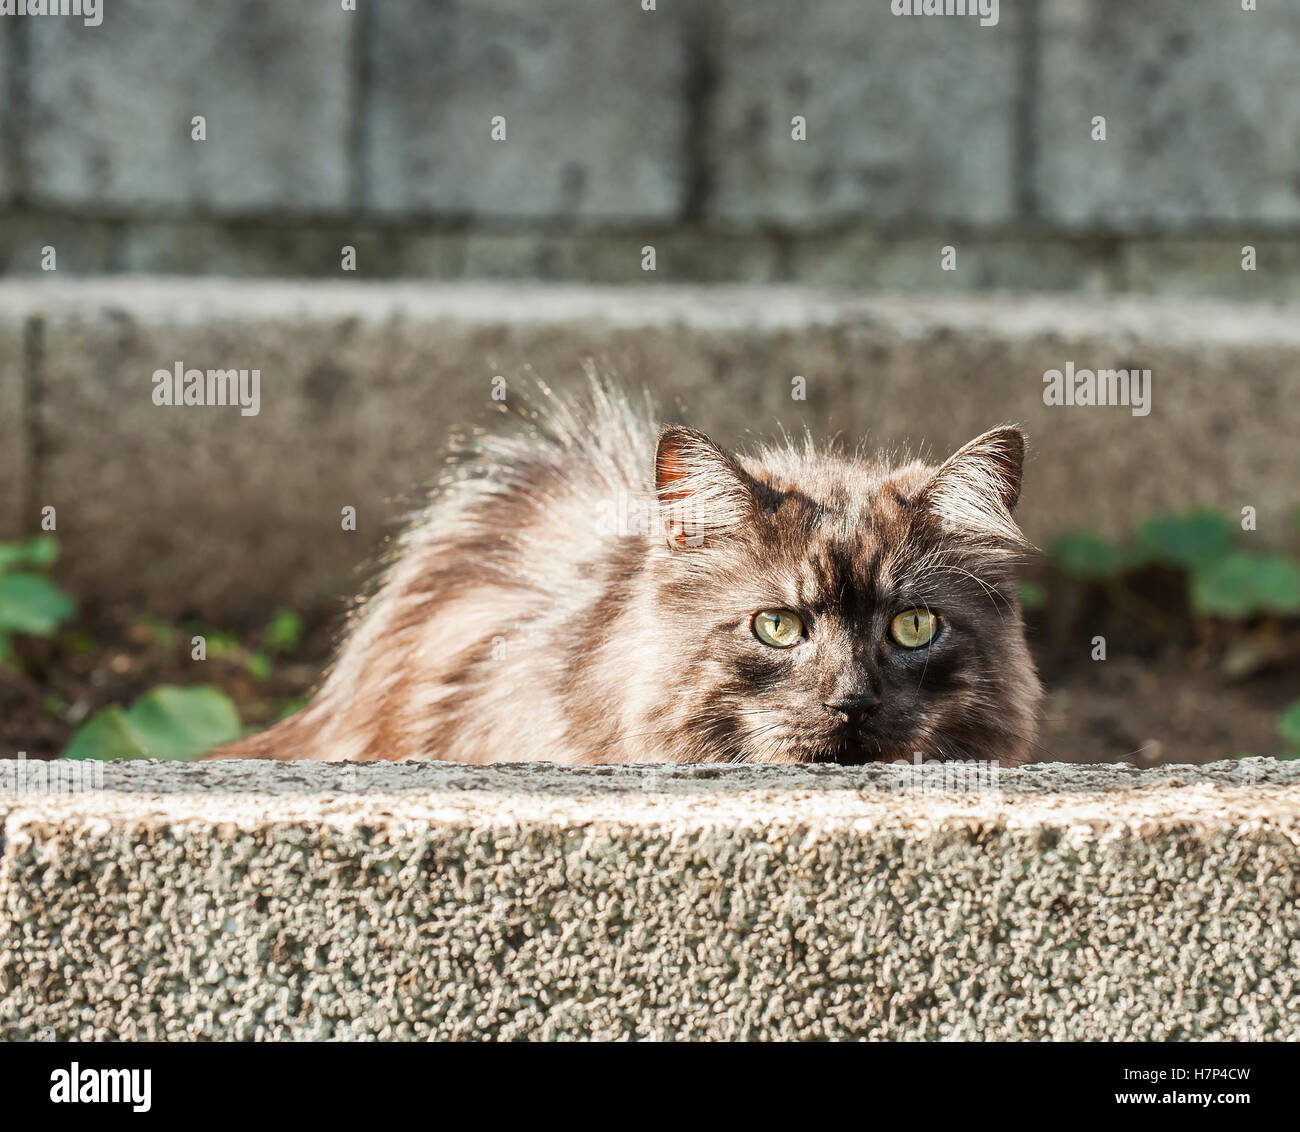 Silver cat is hidding behind a concrete wall. Stock Photo